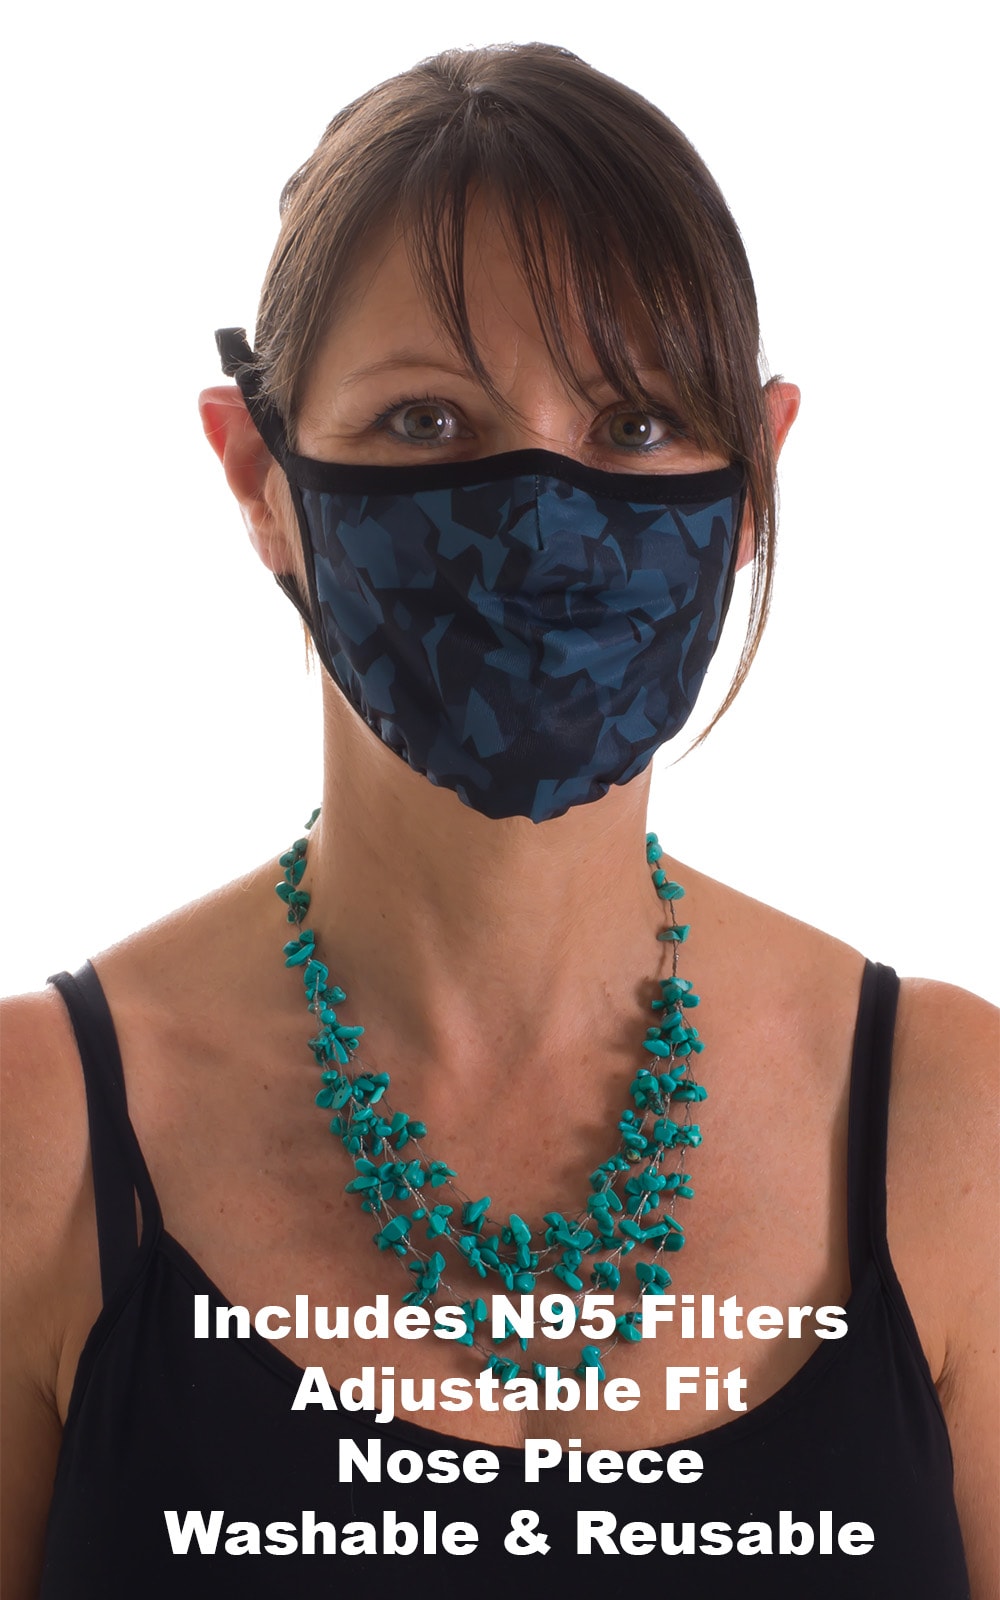 Camo N95 3-ply face mask 6